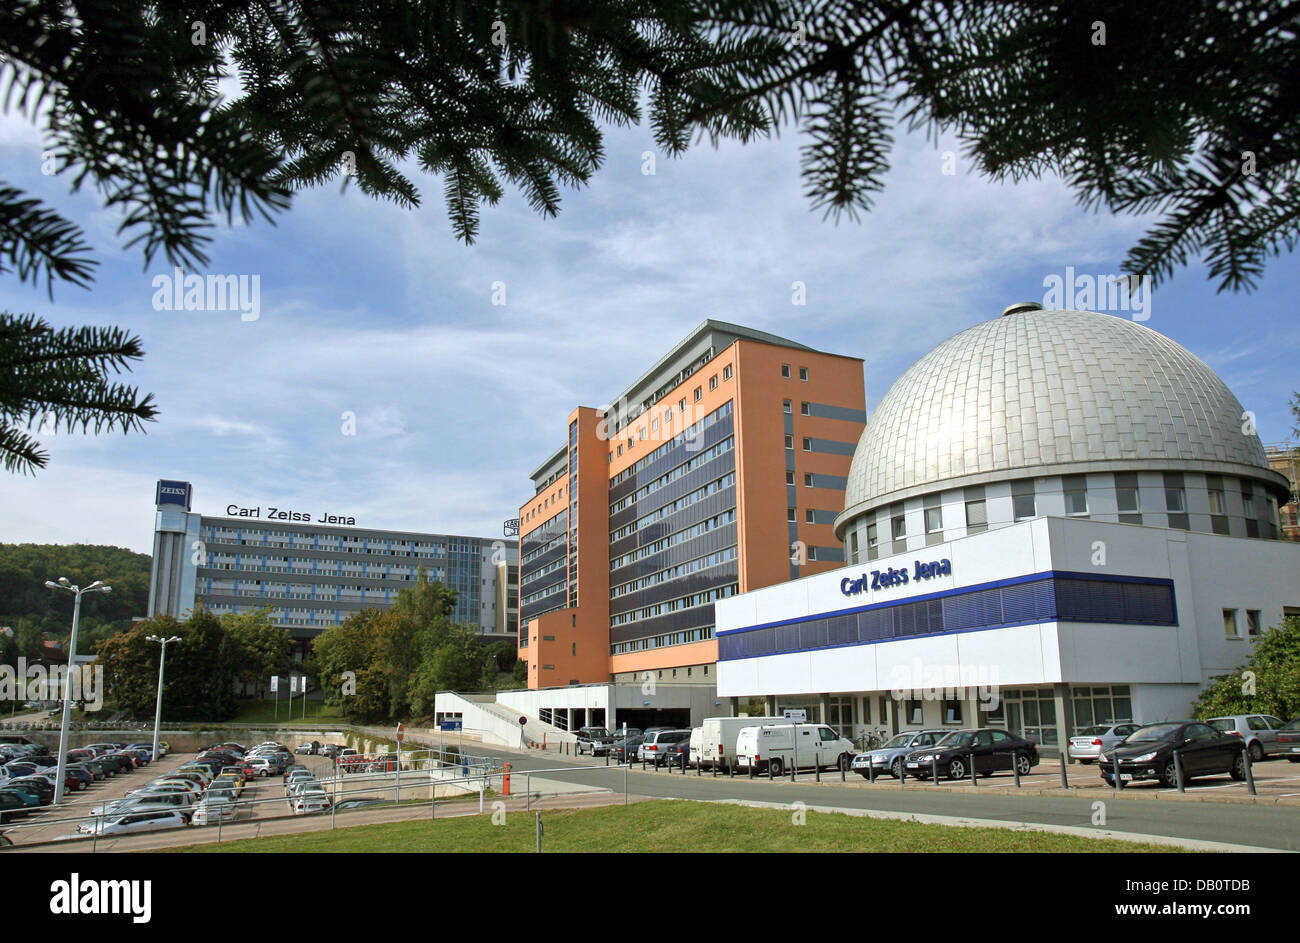 The picture shows the company headquarters of Carl Zeiss Jena GmbH, Jena, Germany, 17 September 2007. Carl Zeiss was founded in 1846 in Jena as factory for industrial measurements and medical devices. Today it is the leading group in the opict and optoelectronic industry. The group employs 11,300 people and is present and has subsidiaries in more that 30 countries.  Photo: Jan-Pete Stock Photo